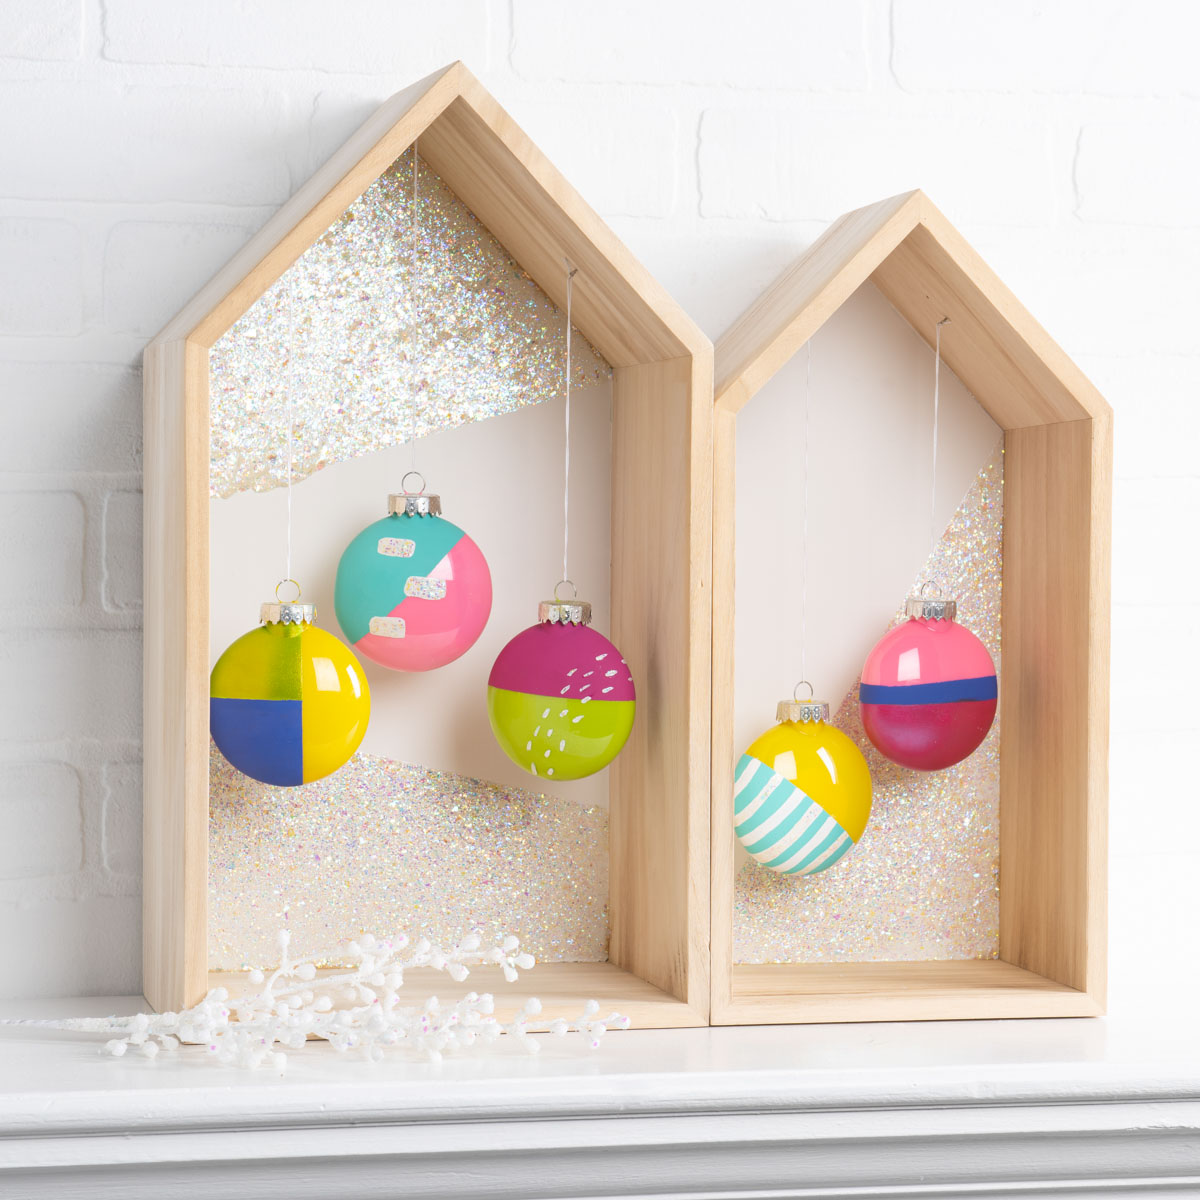 Delta Ornaments and Glitter Explosion Houses